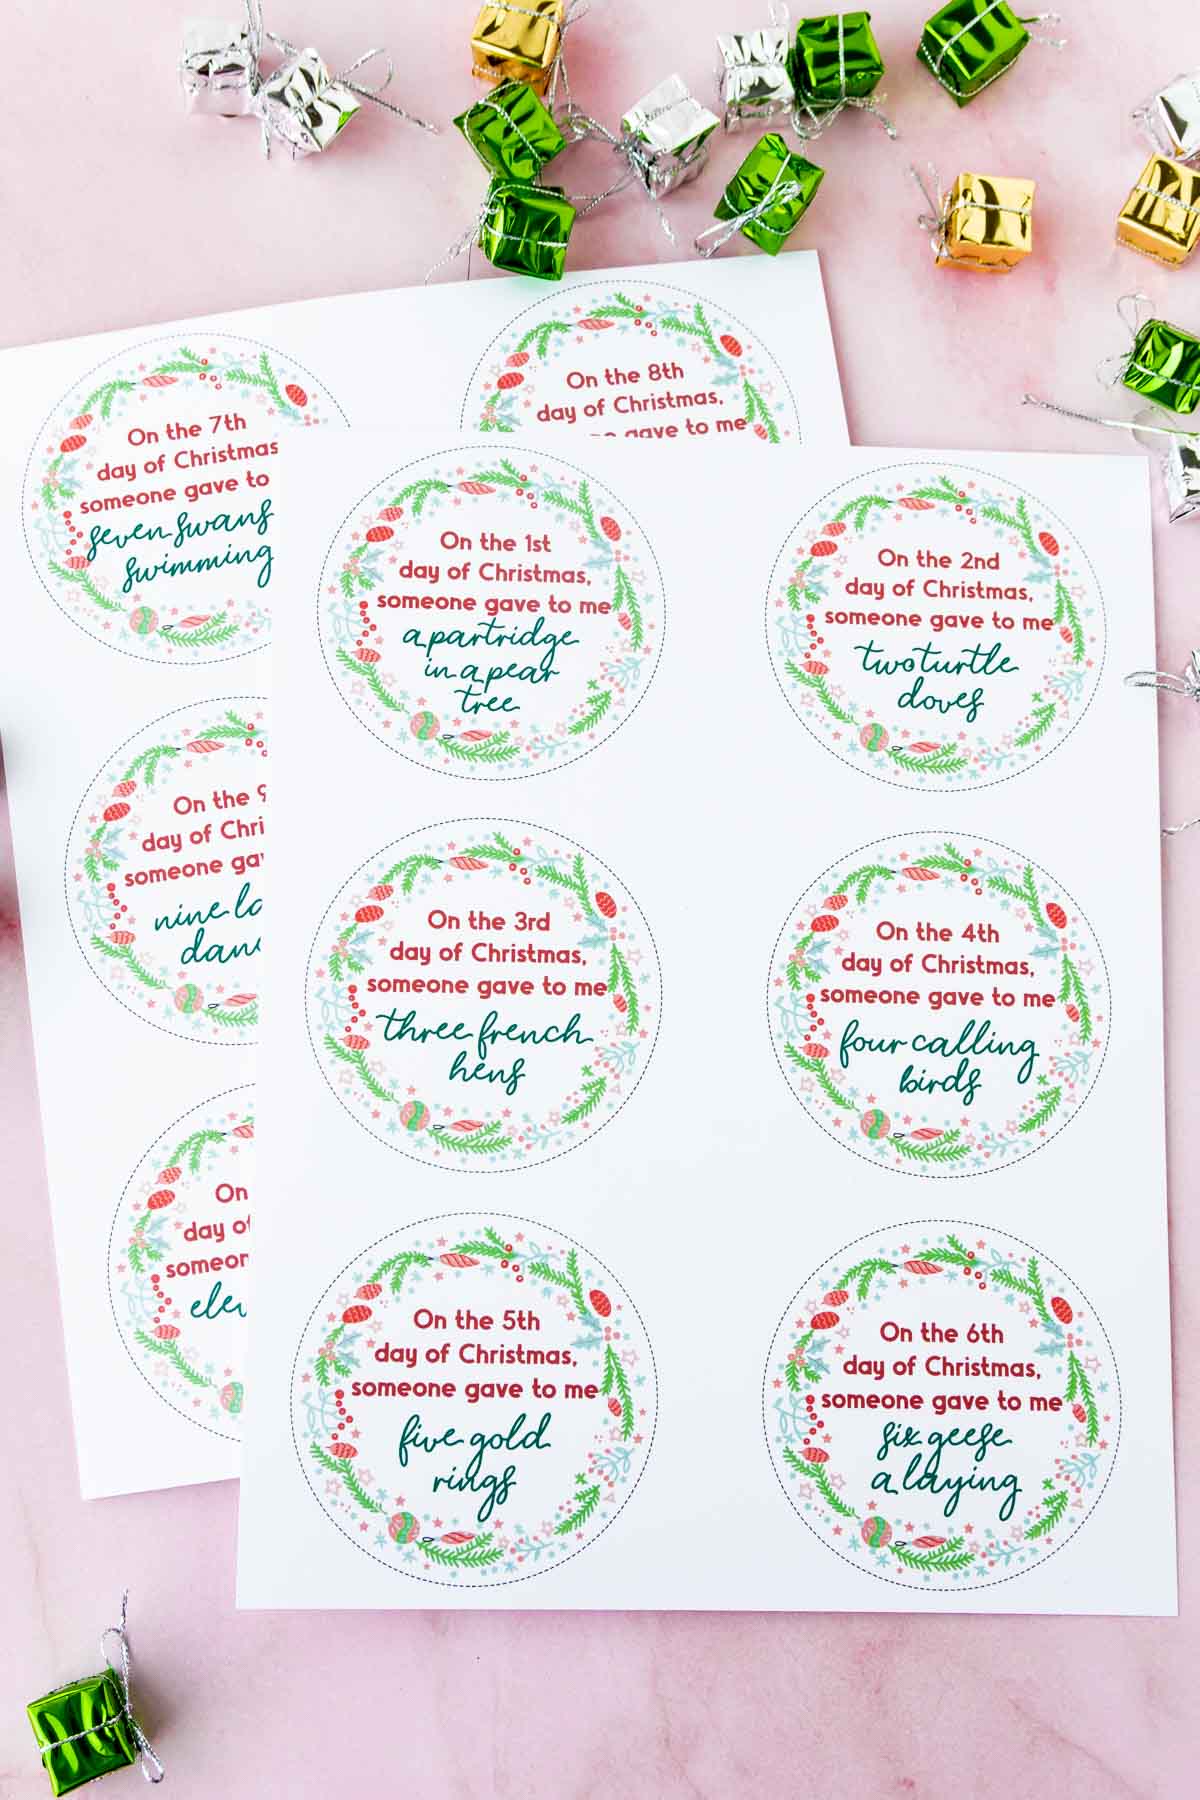 Tags for 12 days of Christmas gifts on a pink background